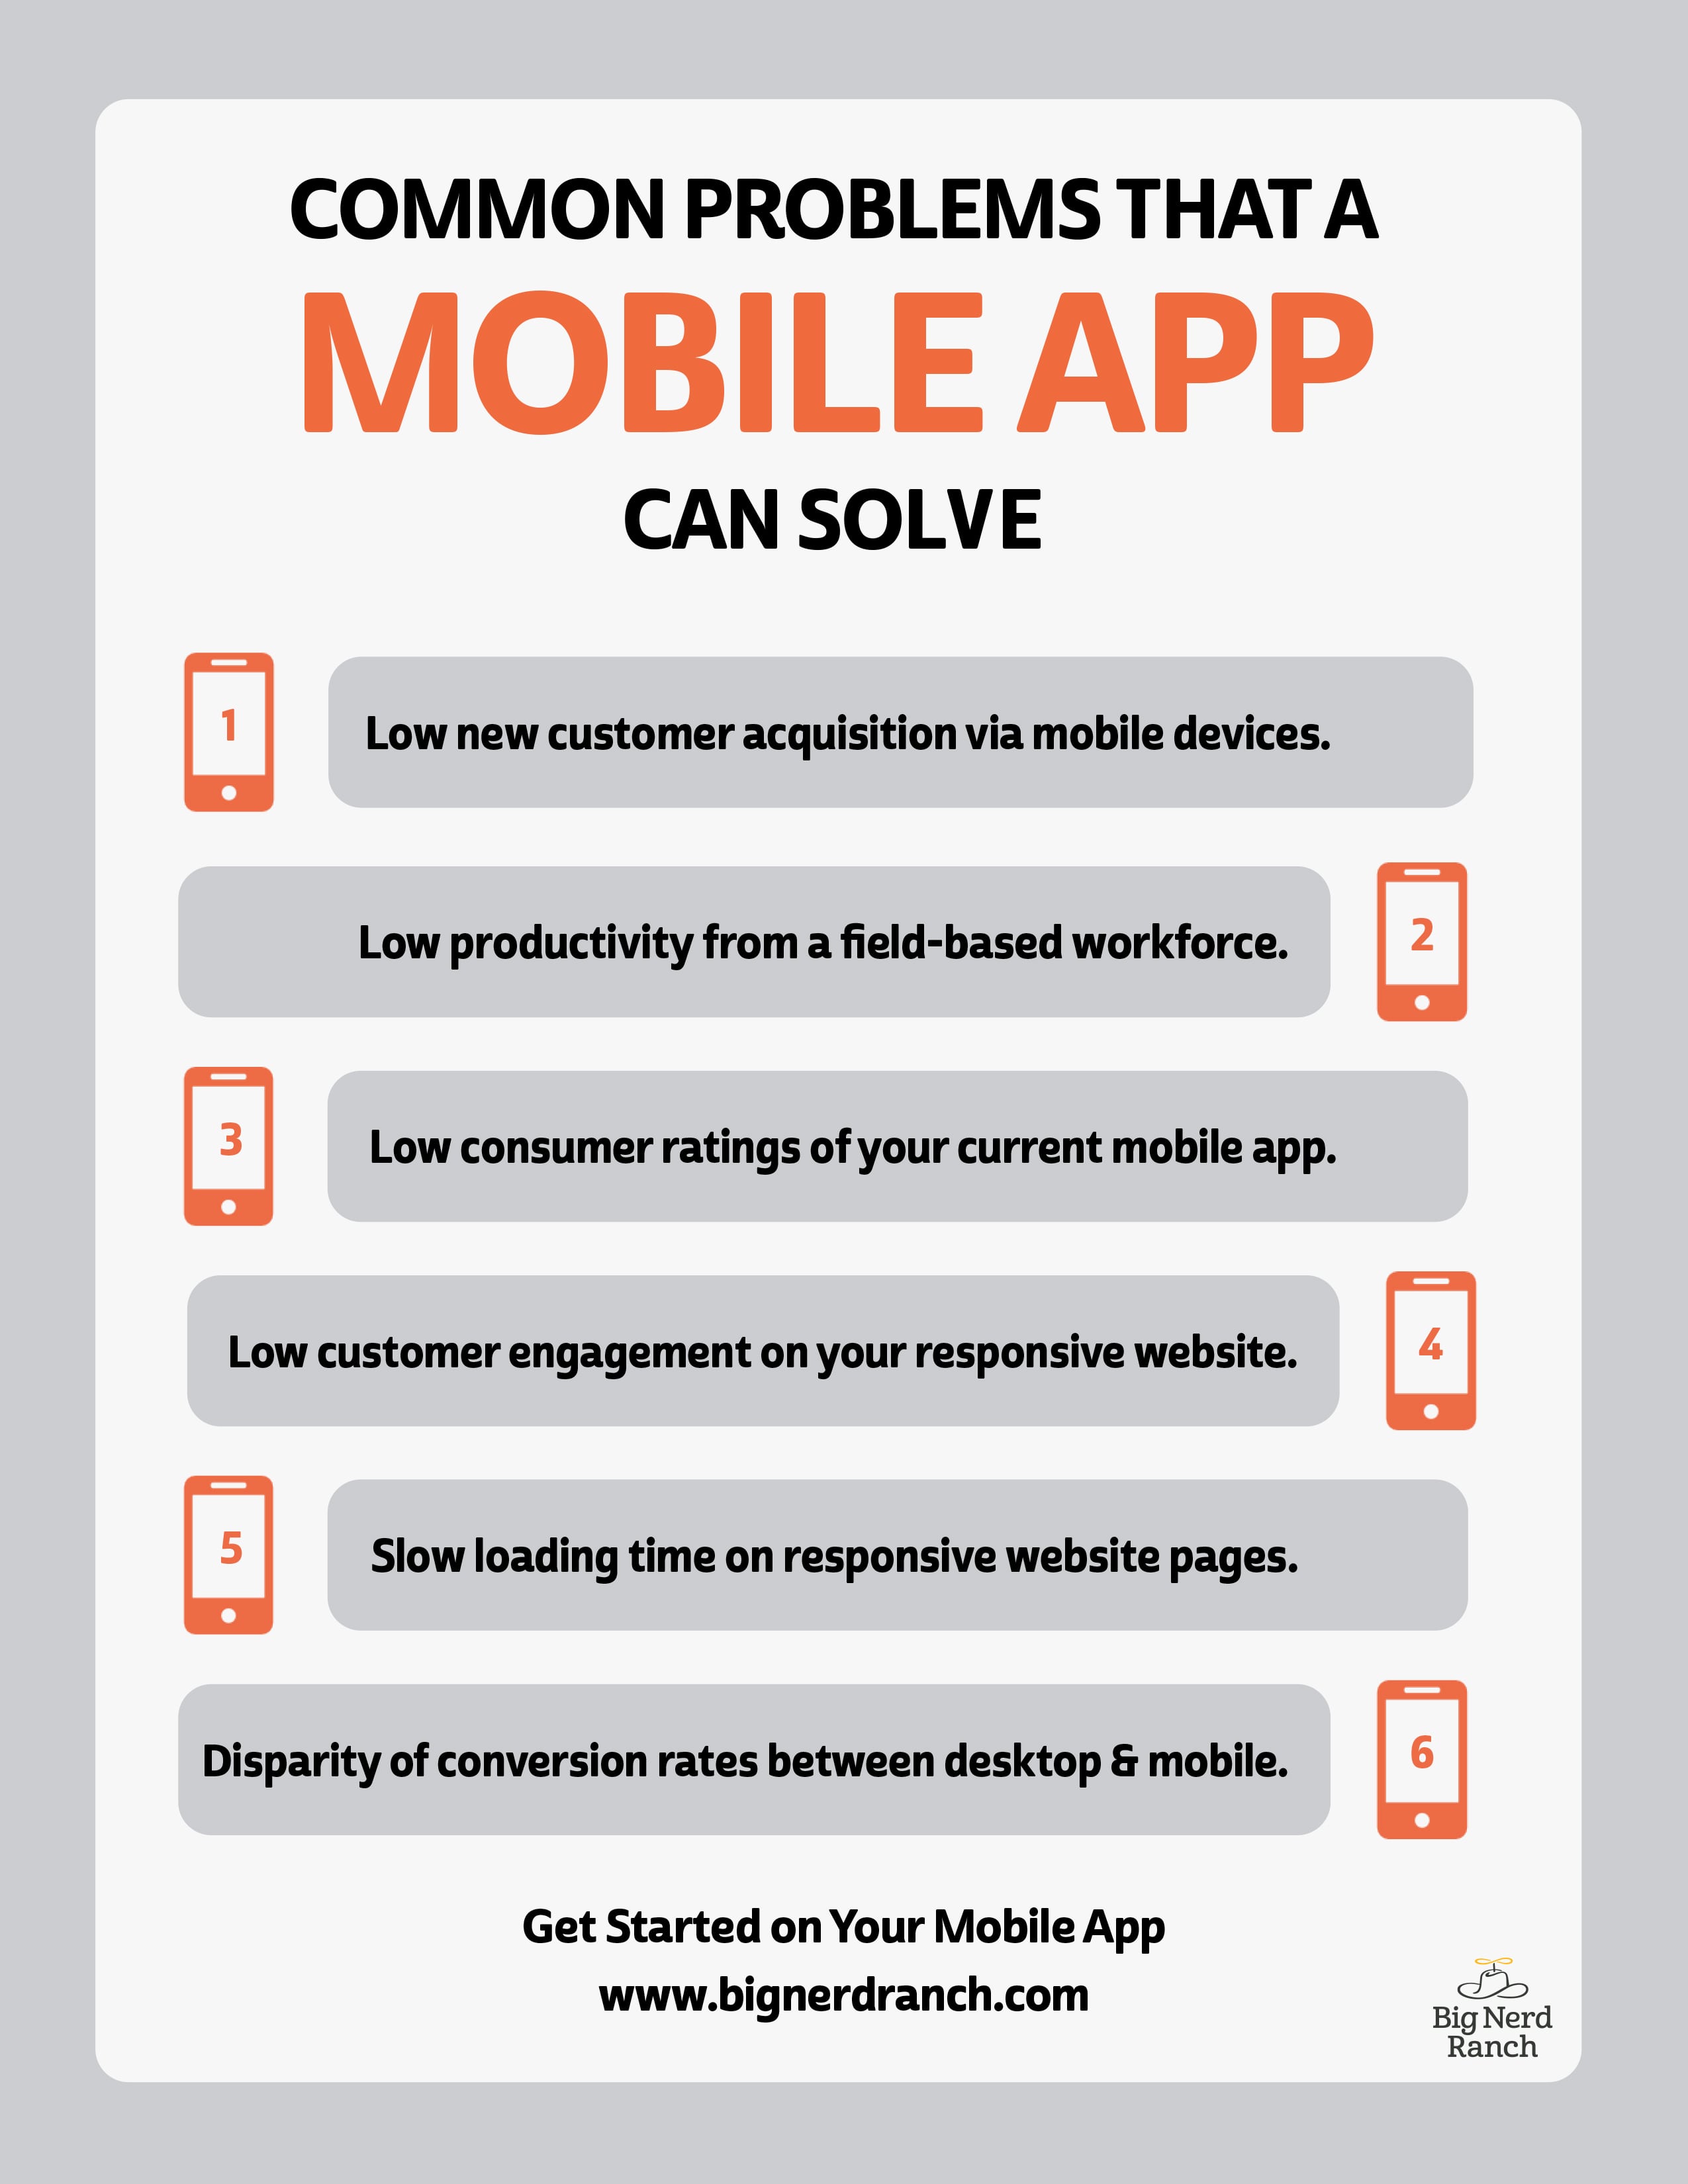 Problems a mobile app can solve